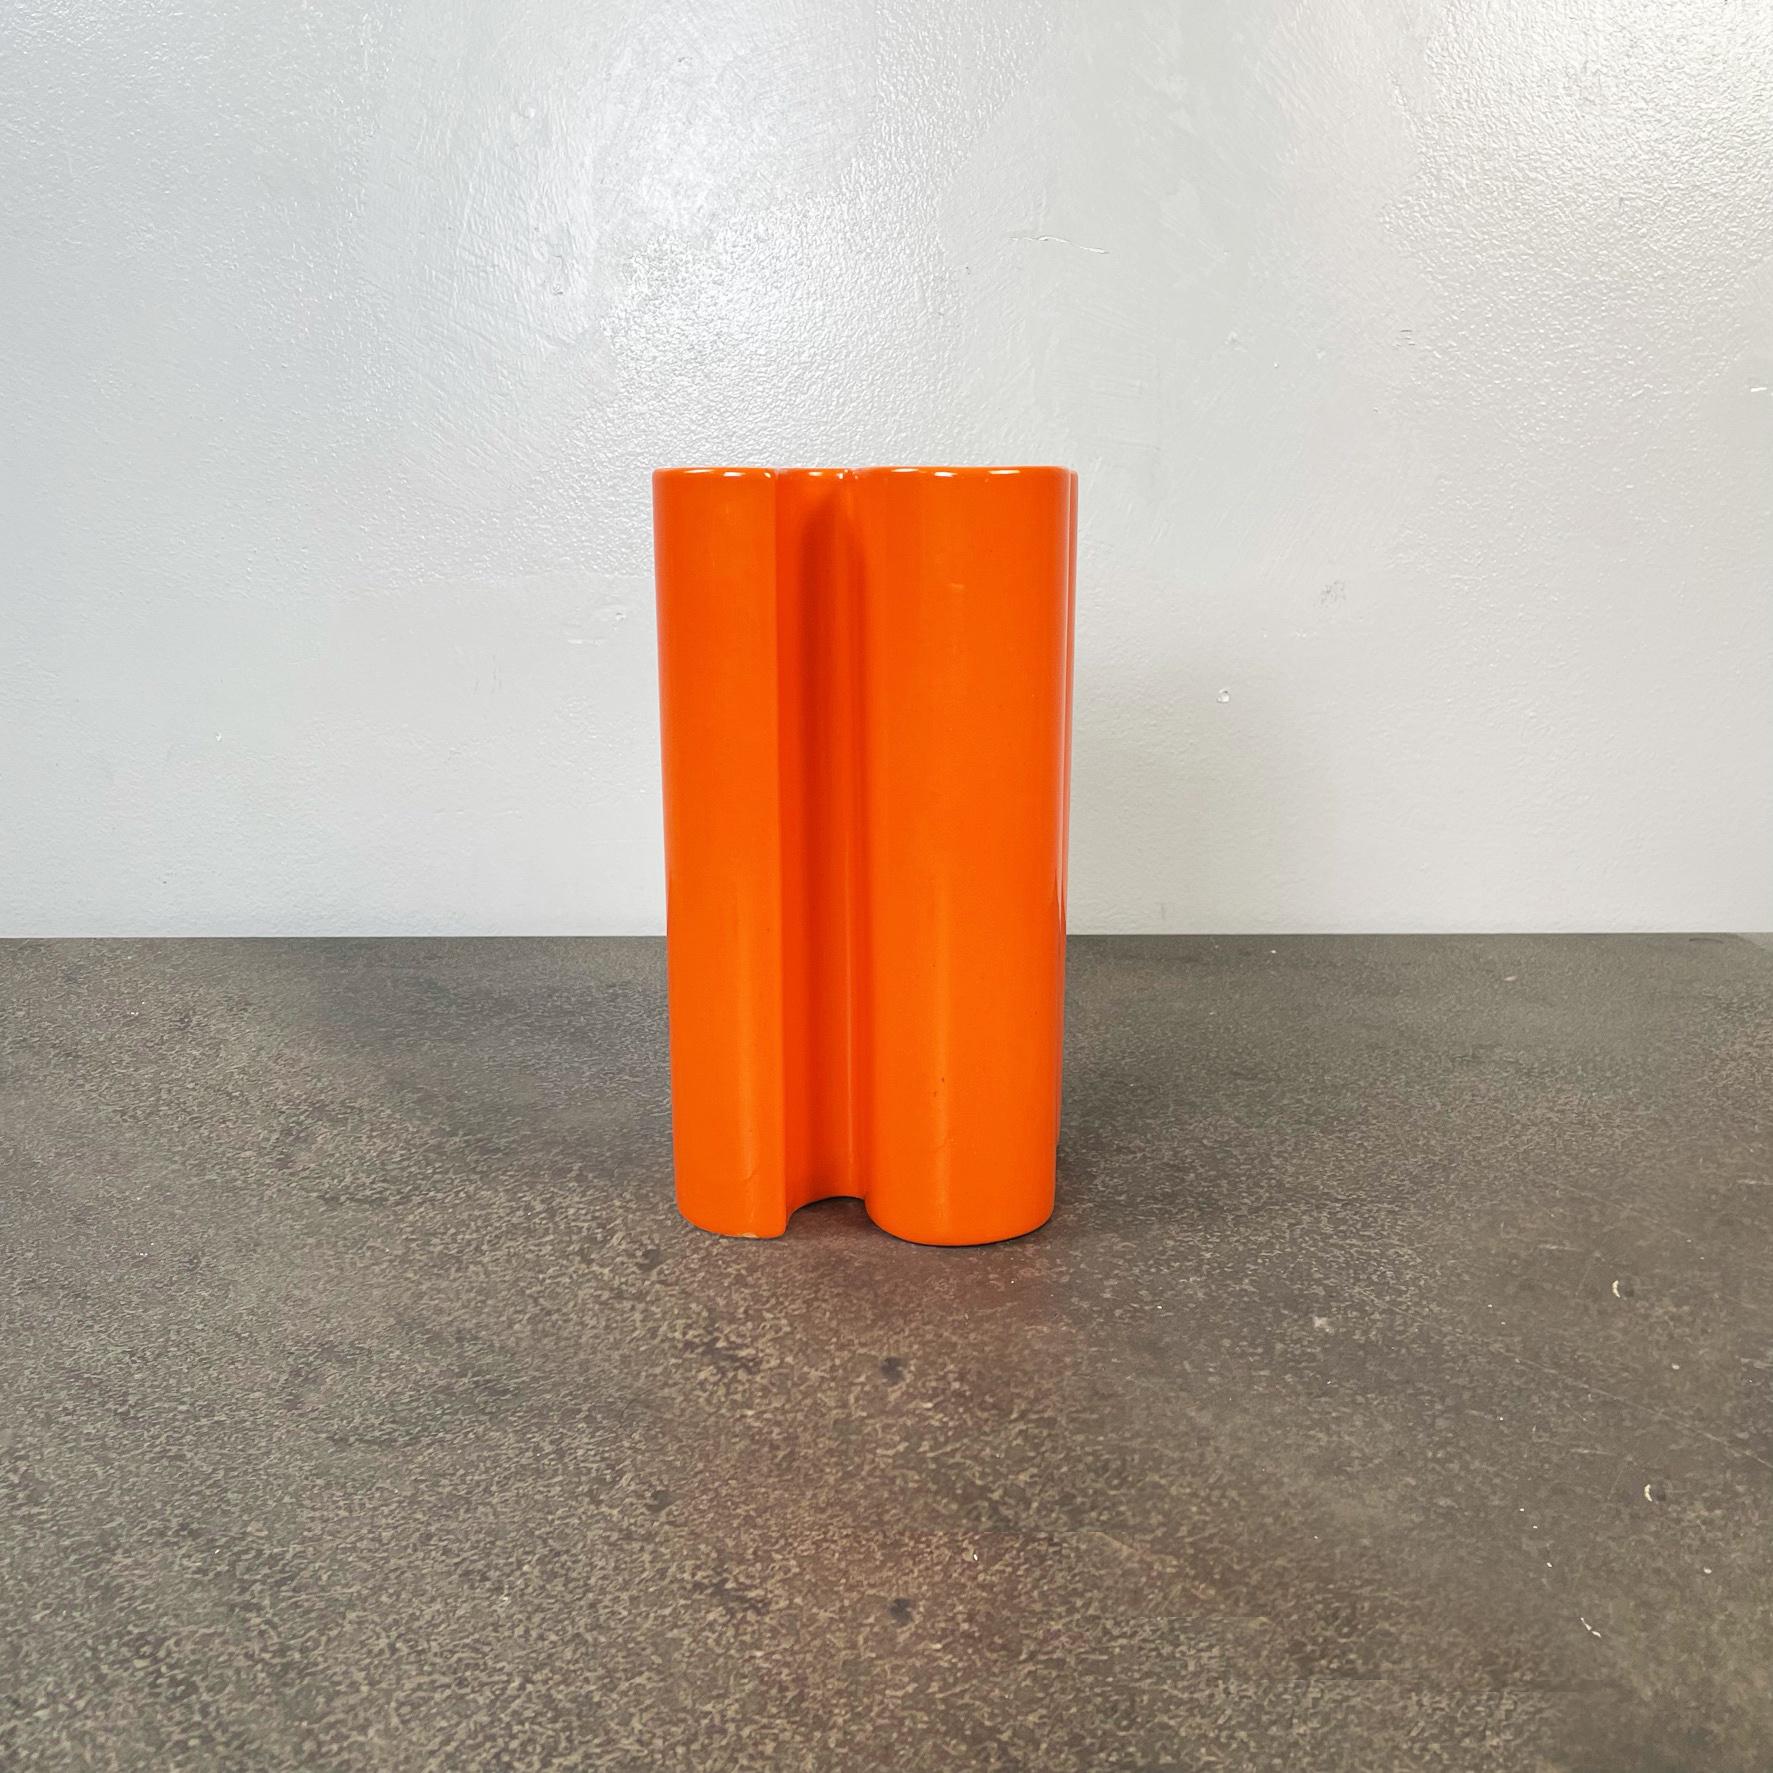 Italian mid-century Orange ceramic Vase by Bettonica for Gabbianelli, 1970s
Vase with a helix shape in orange ceramic.
Produced by Gabbianelli in Italy in the 1970s and designed by Franco Bettonica italian designer of the same period
Gabbianelli